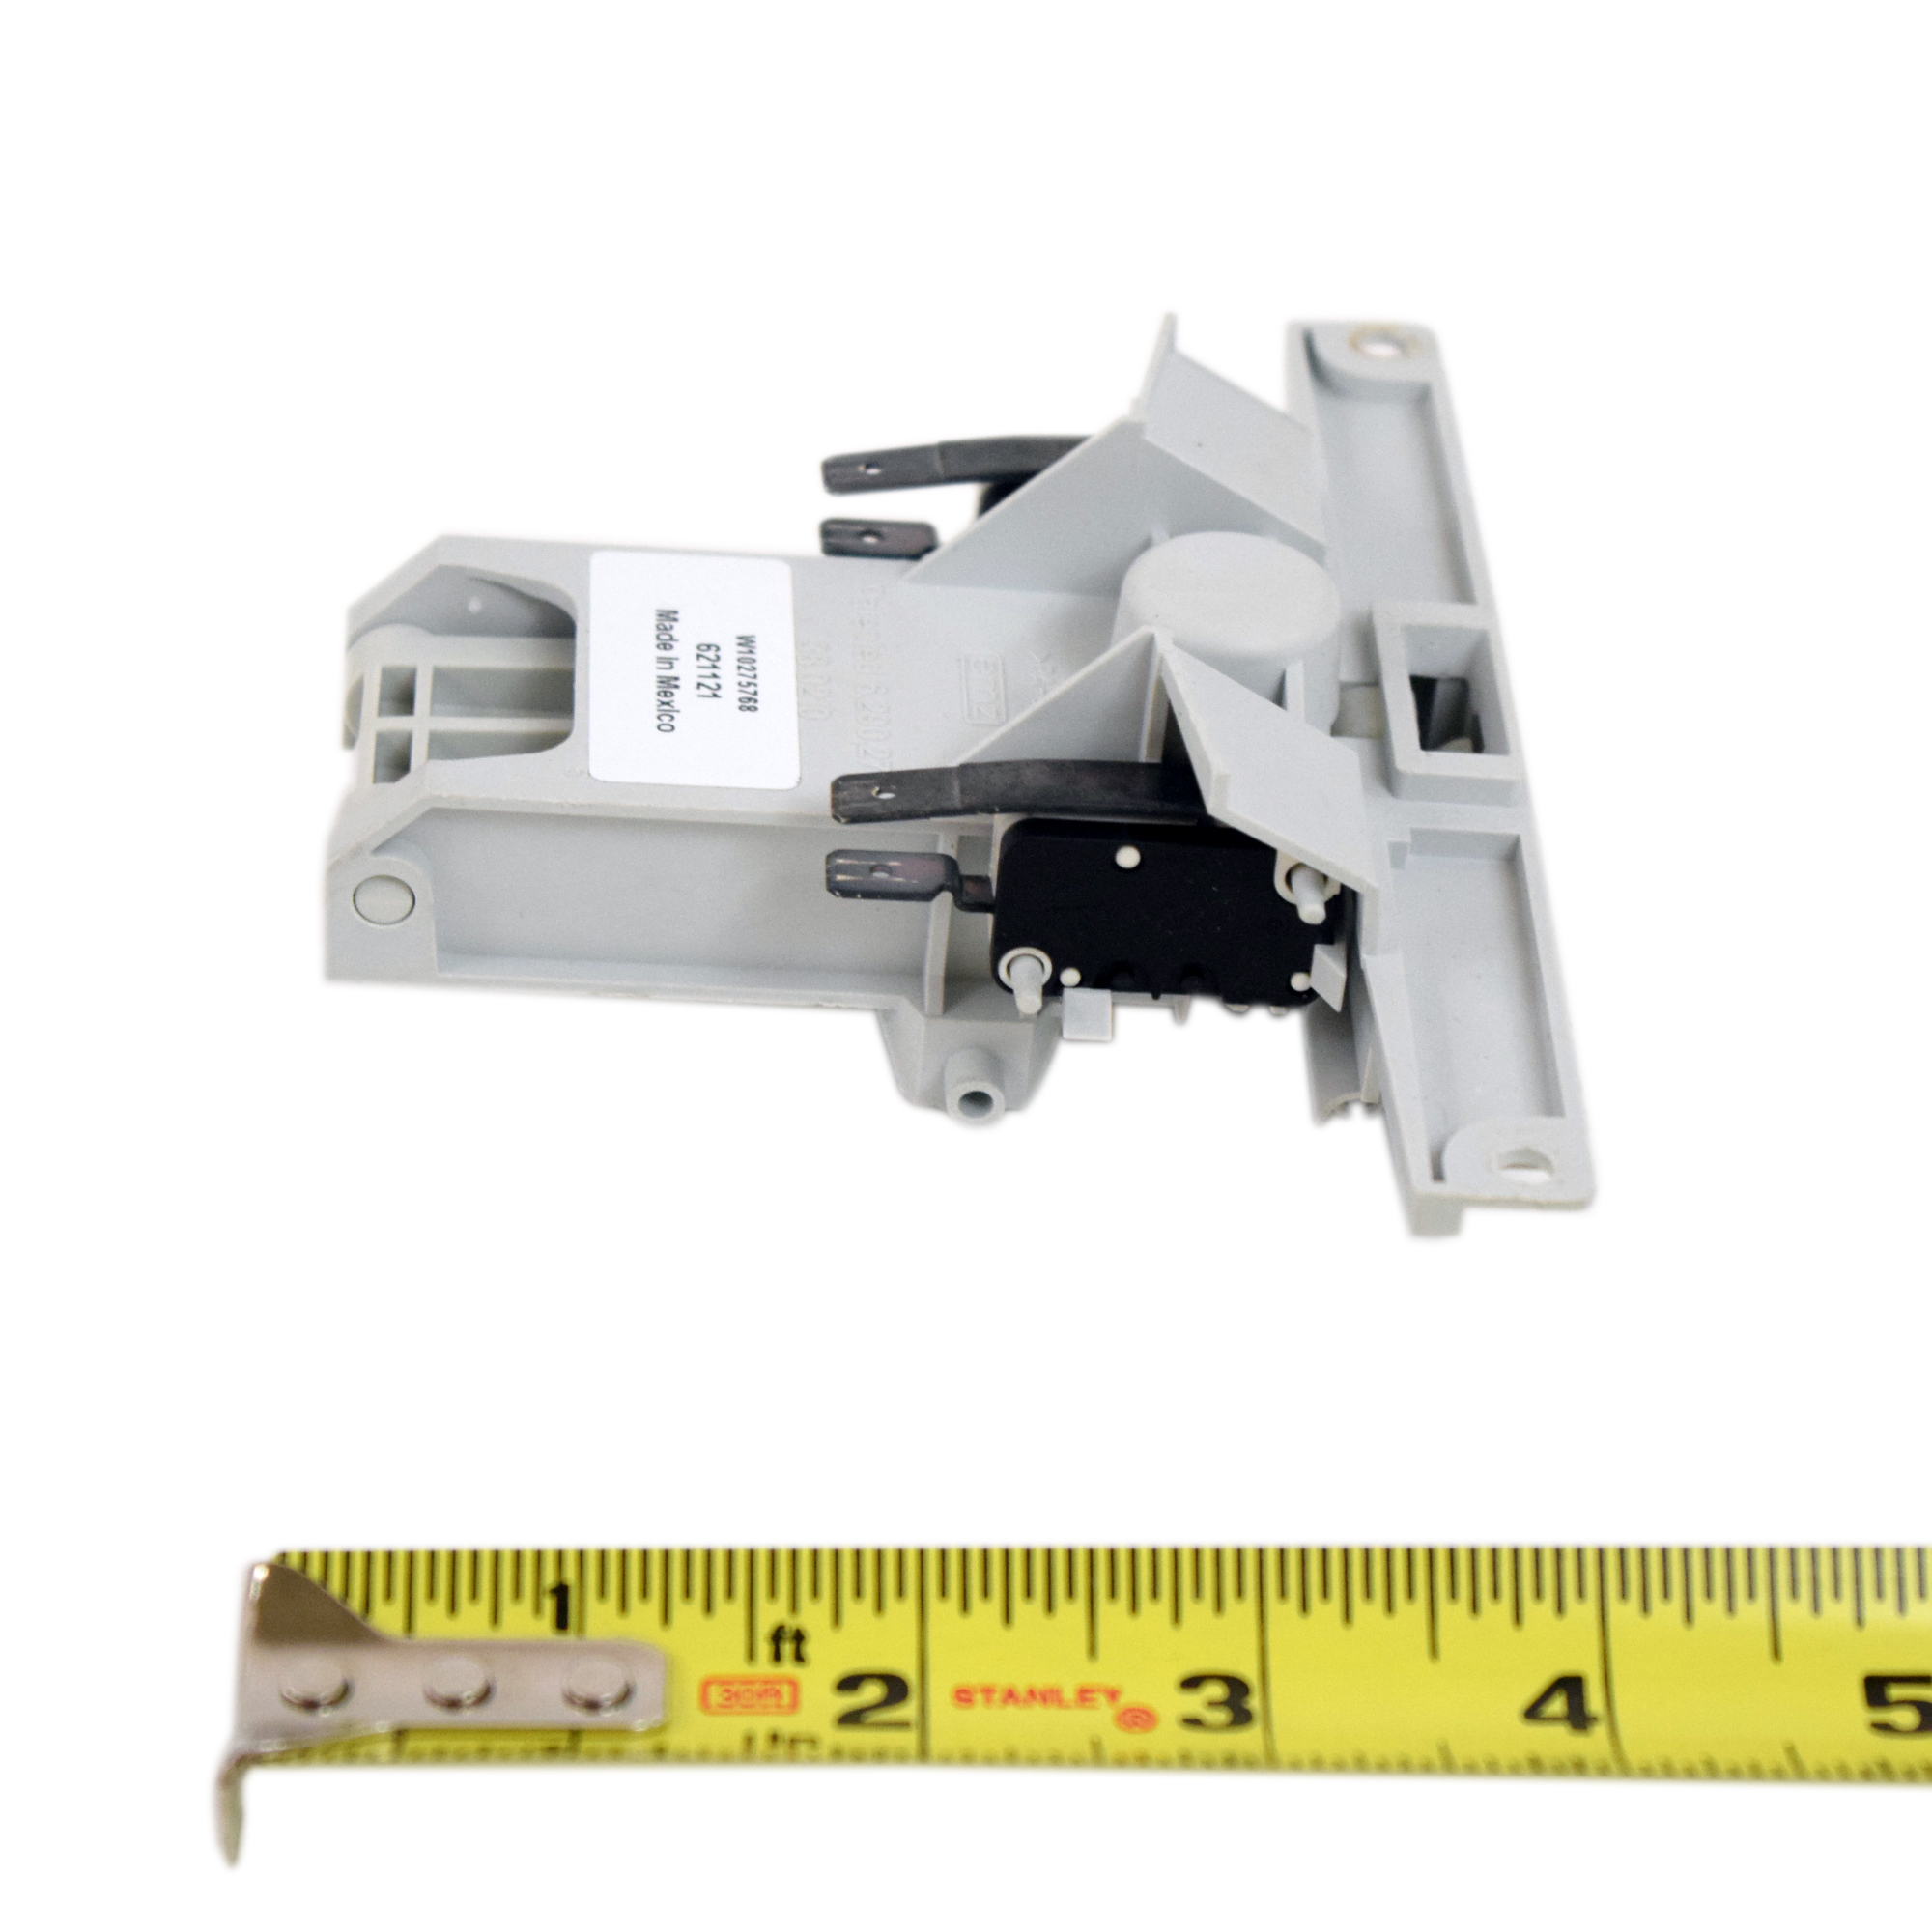 Whirlpool  W10275768 Dishwasher Door Latch Assembly (replaces W10275768) Genuine Original Equipment Manufacturer (OEM) Part